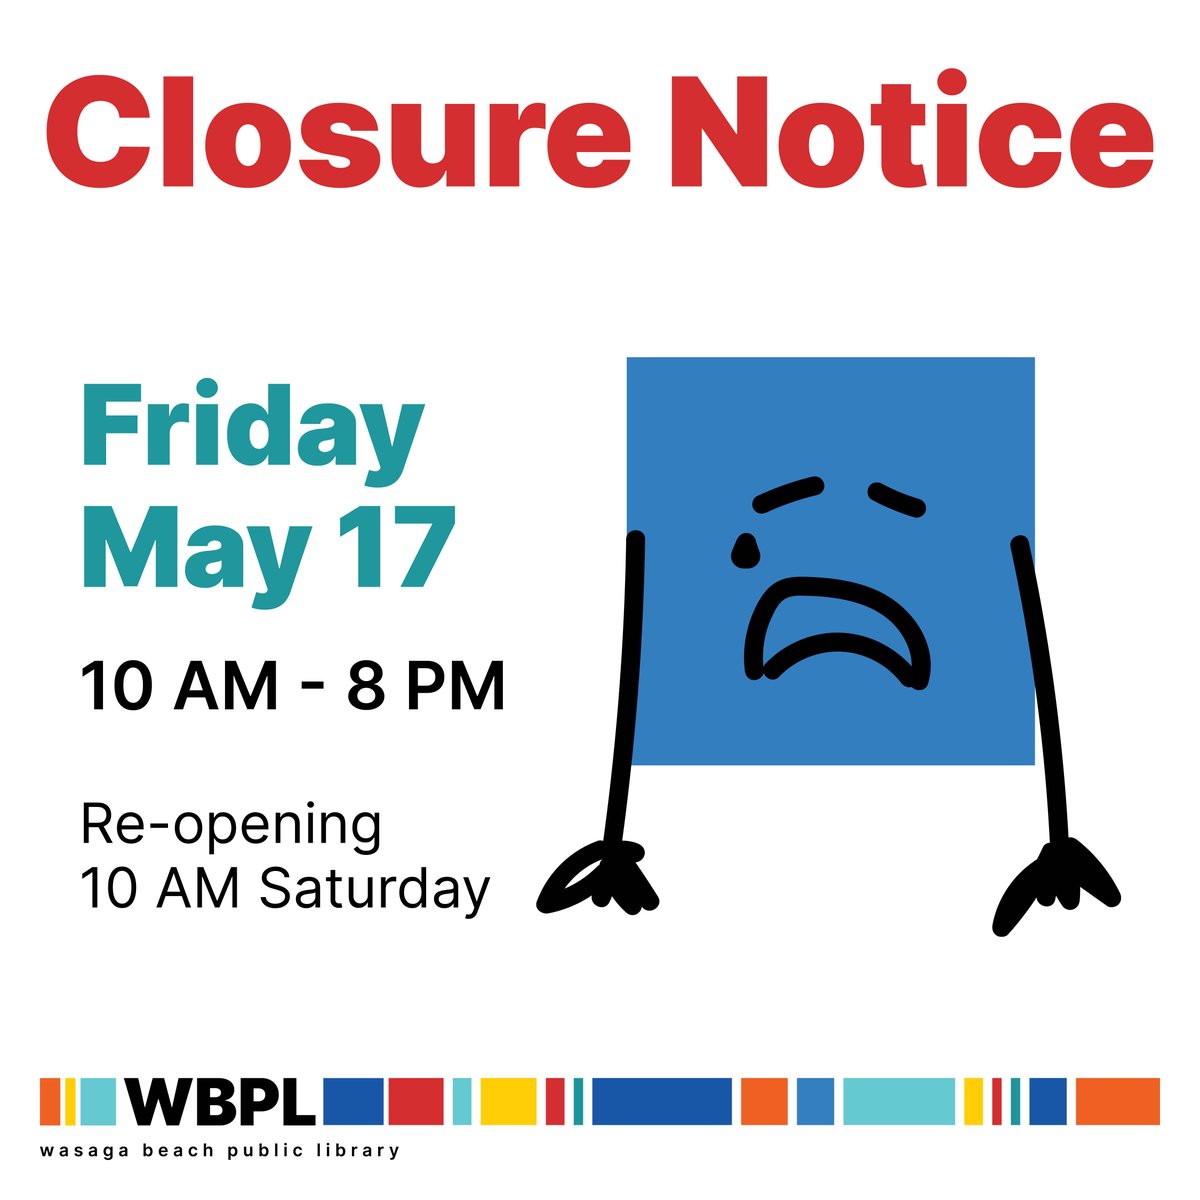 📢 Heads up, everyone! The library will be closed on Friday, May 17 from 10 AM - 8 PM for staff training. We'll reopen bright and early at 10 AM on Saturday, May 18. Thanks for your understanding! 📚 #LibraryClosure #WasagaBeach #FindItHere